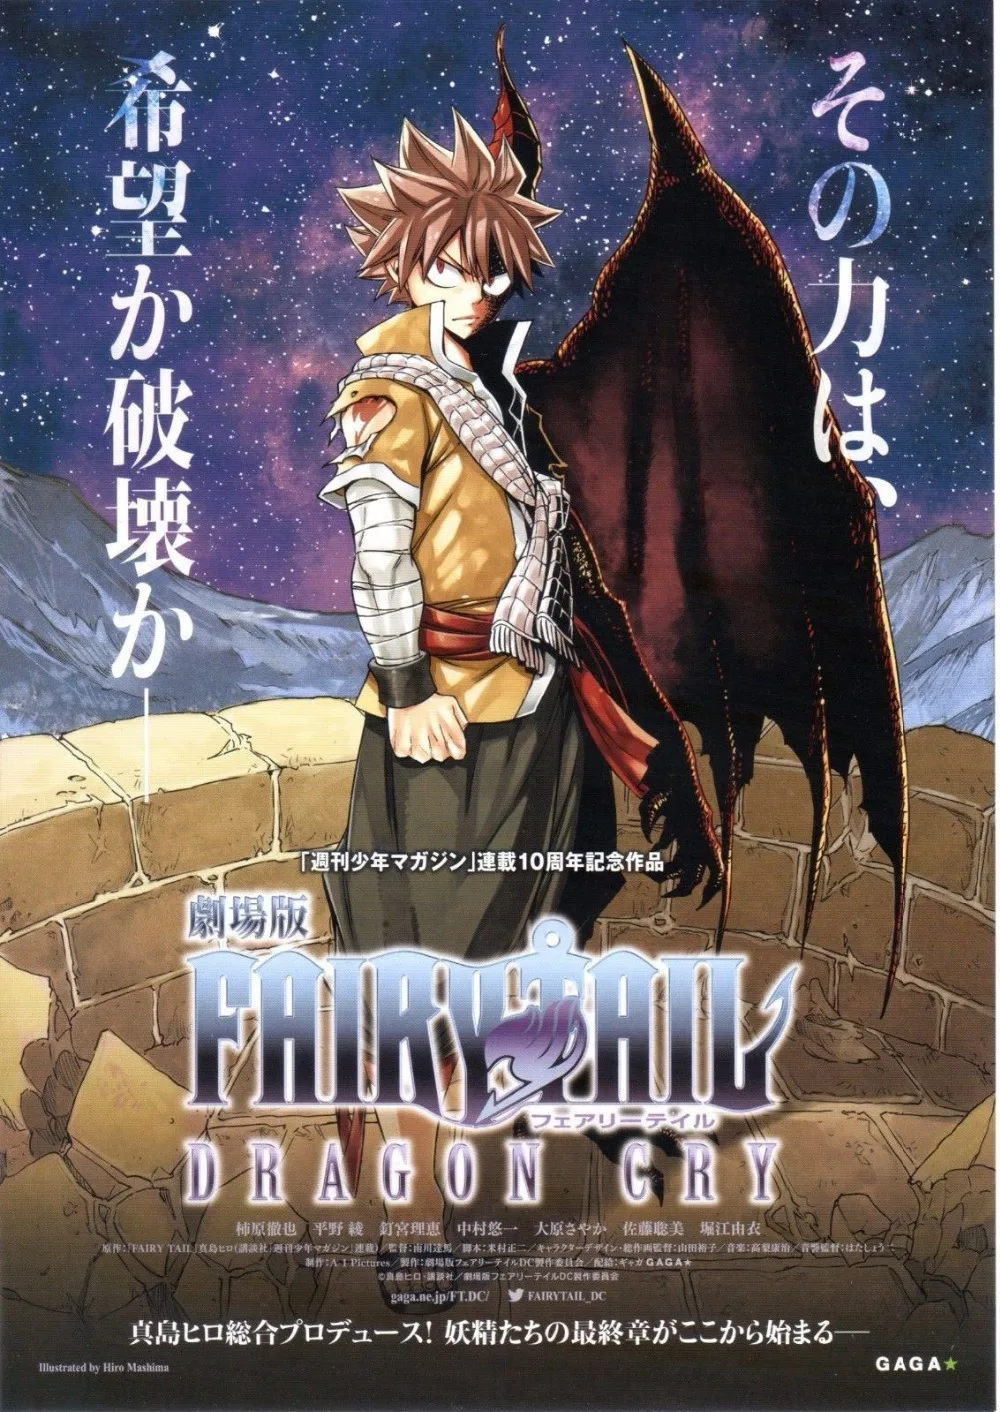 New Fairy Tail Dragon Cry 2017 Anime Promo-Silk Art Poster Wall Sicker Decoration Gift